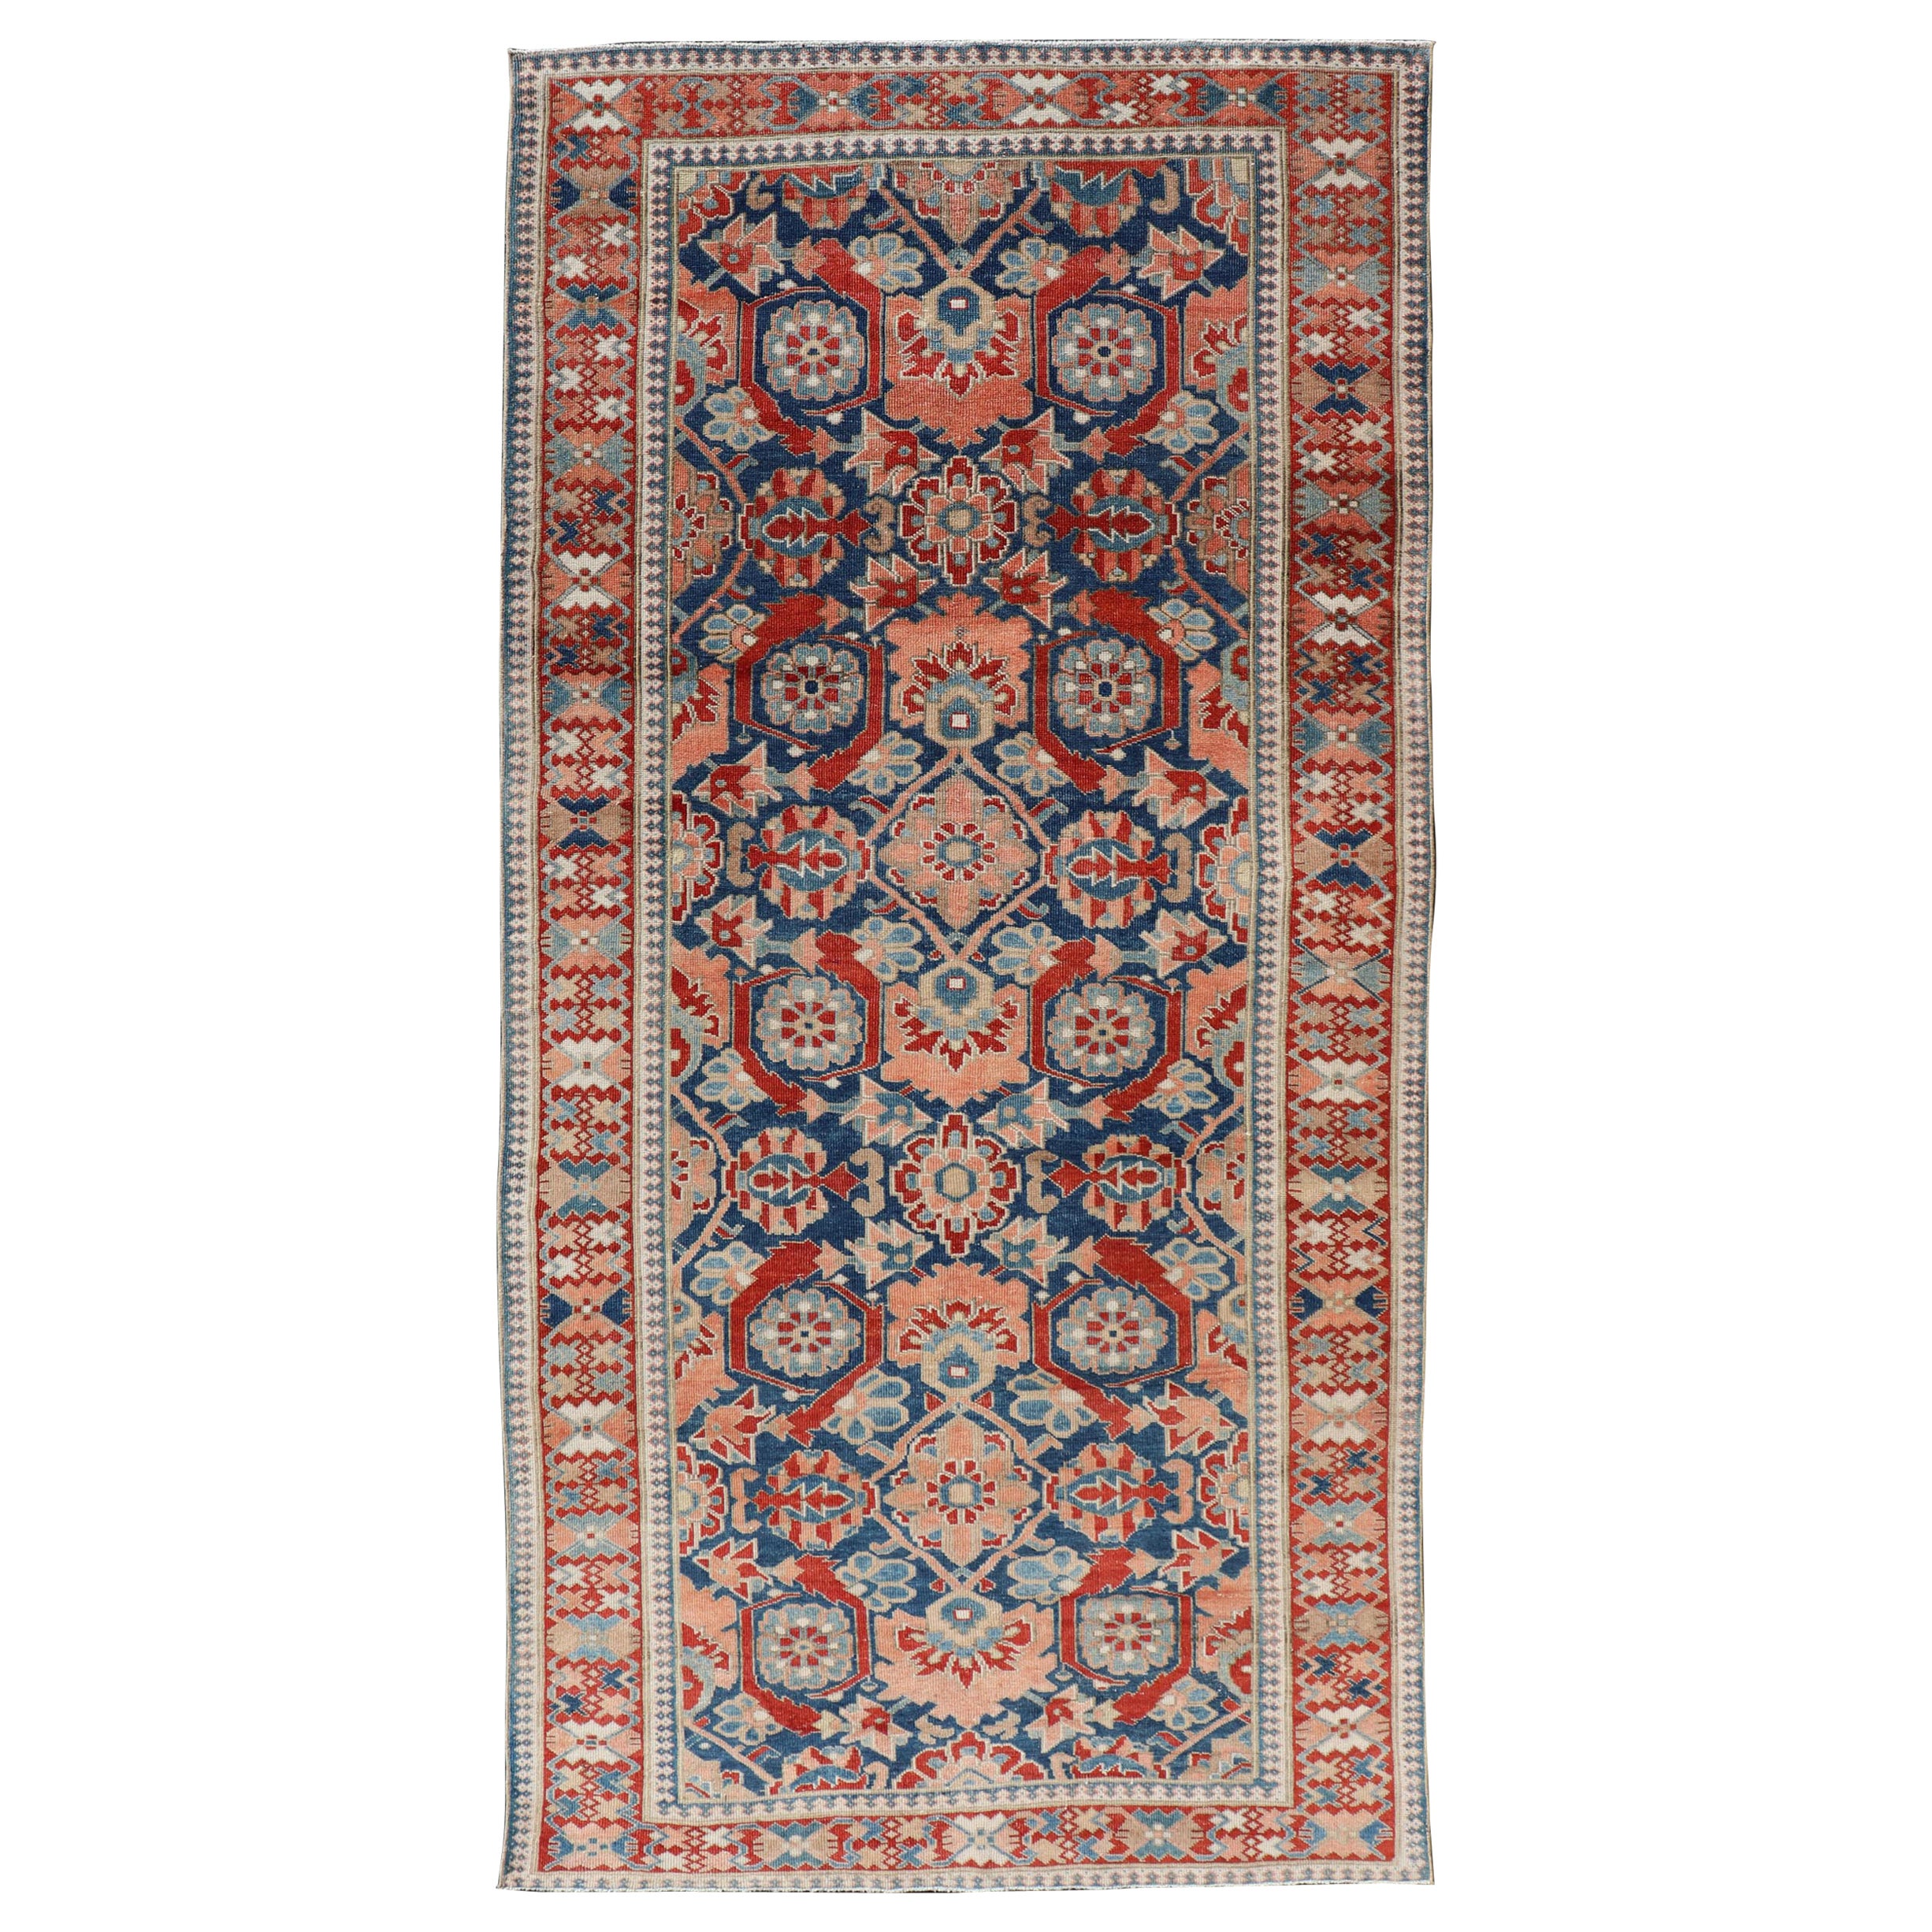 Antique Persian Tabriz Gallery Rug with Large Scale Florals in Medium Blue Field